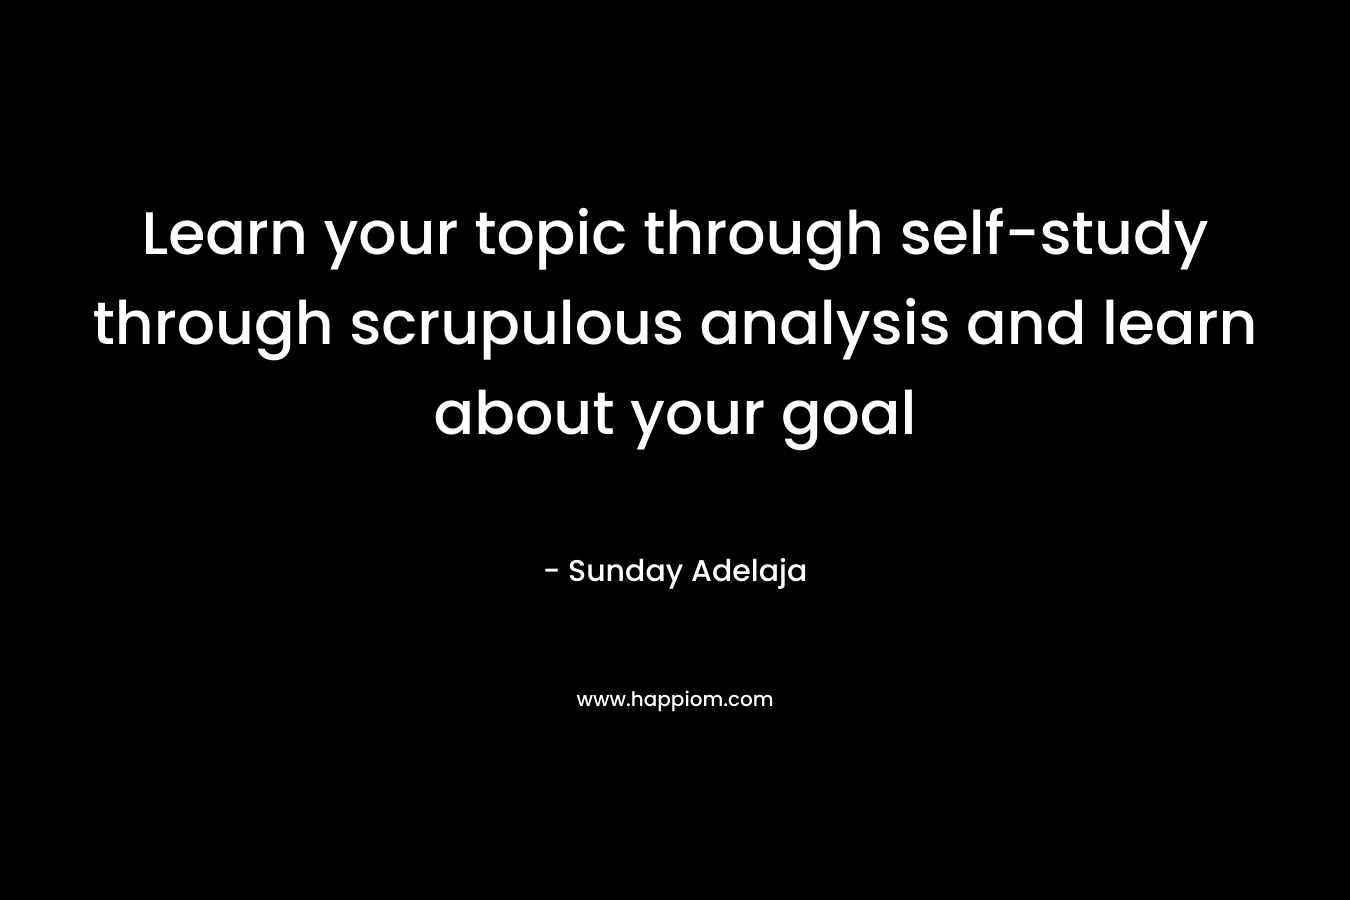 Learn your topic through self-study through scrupulous analysis and learn about your goal – Sunday Adelaja